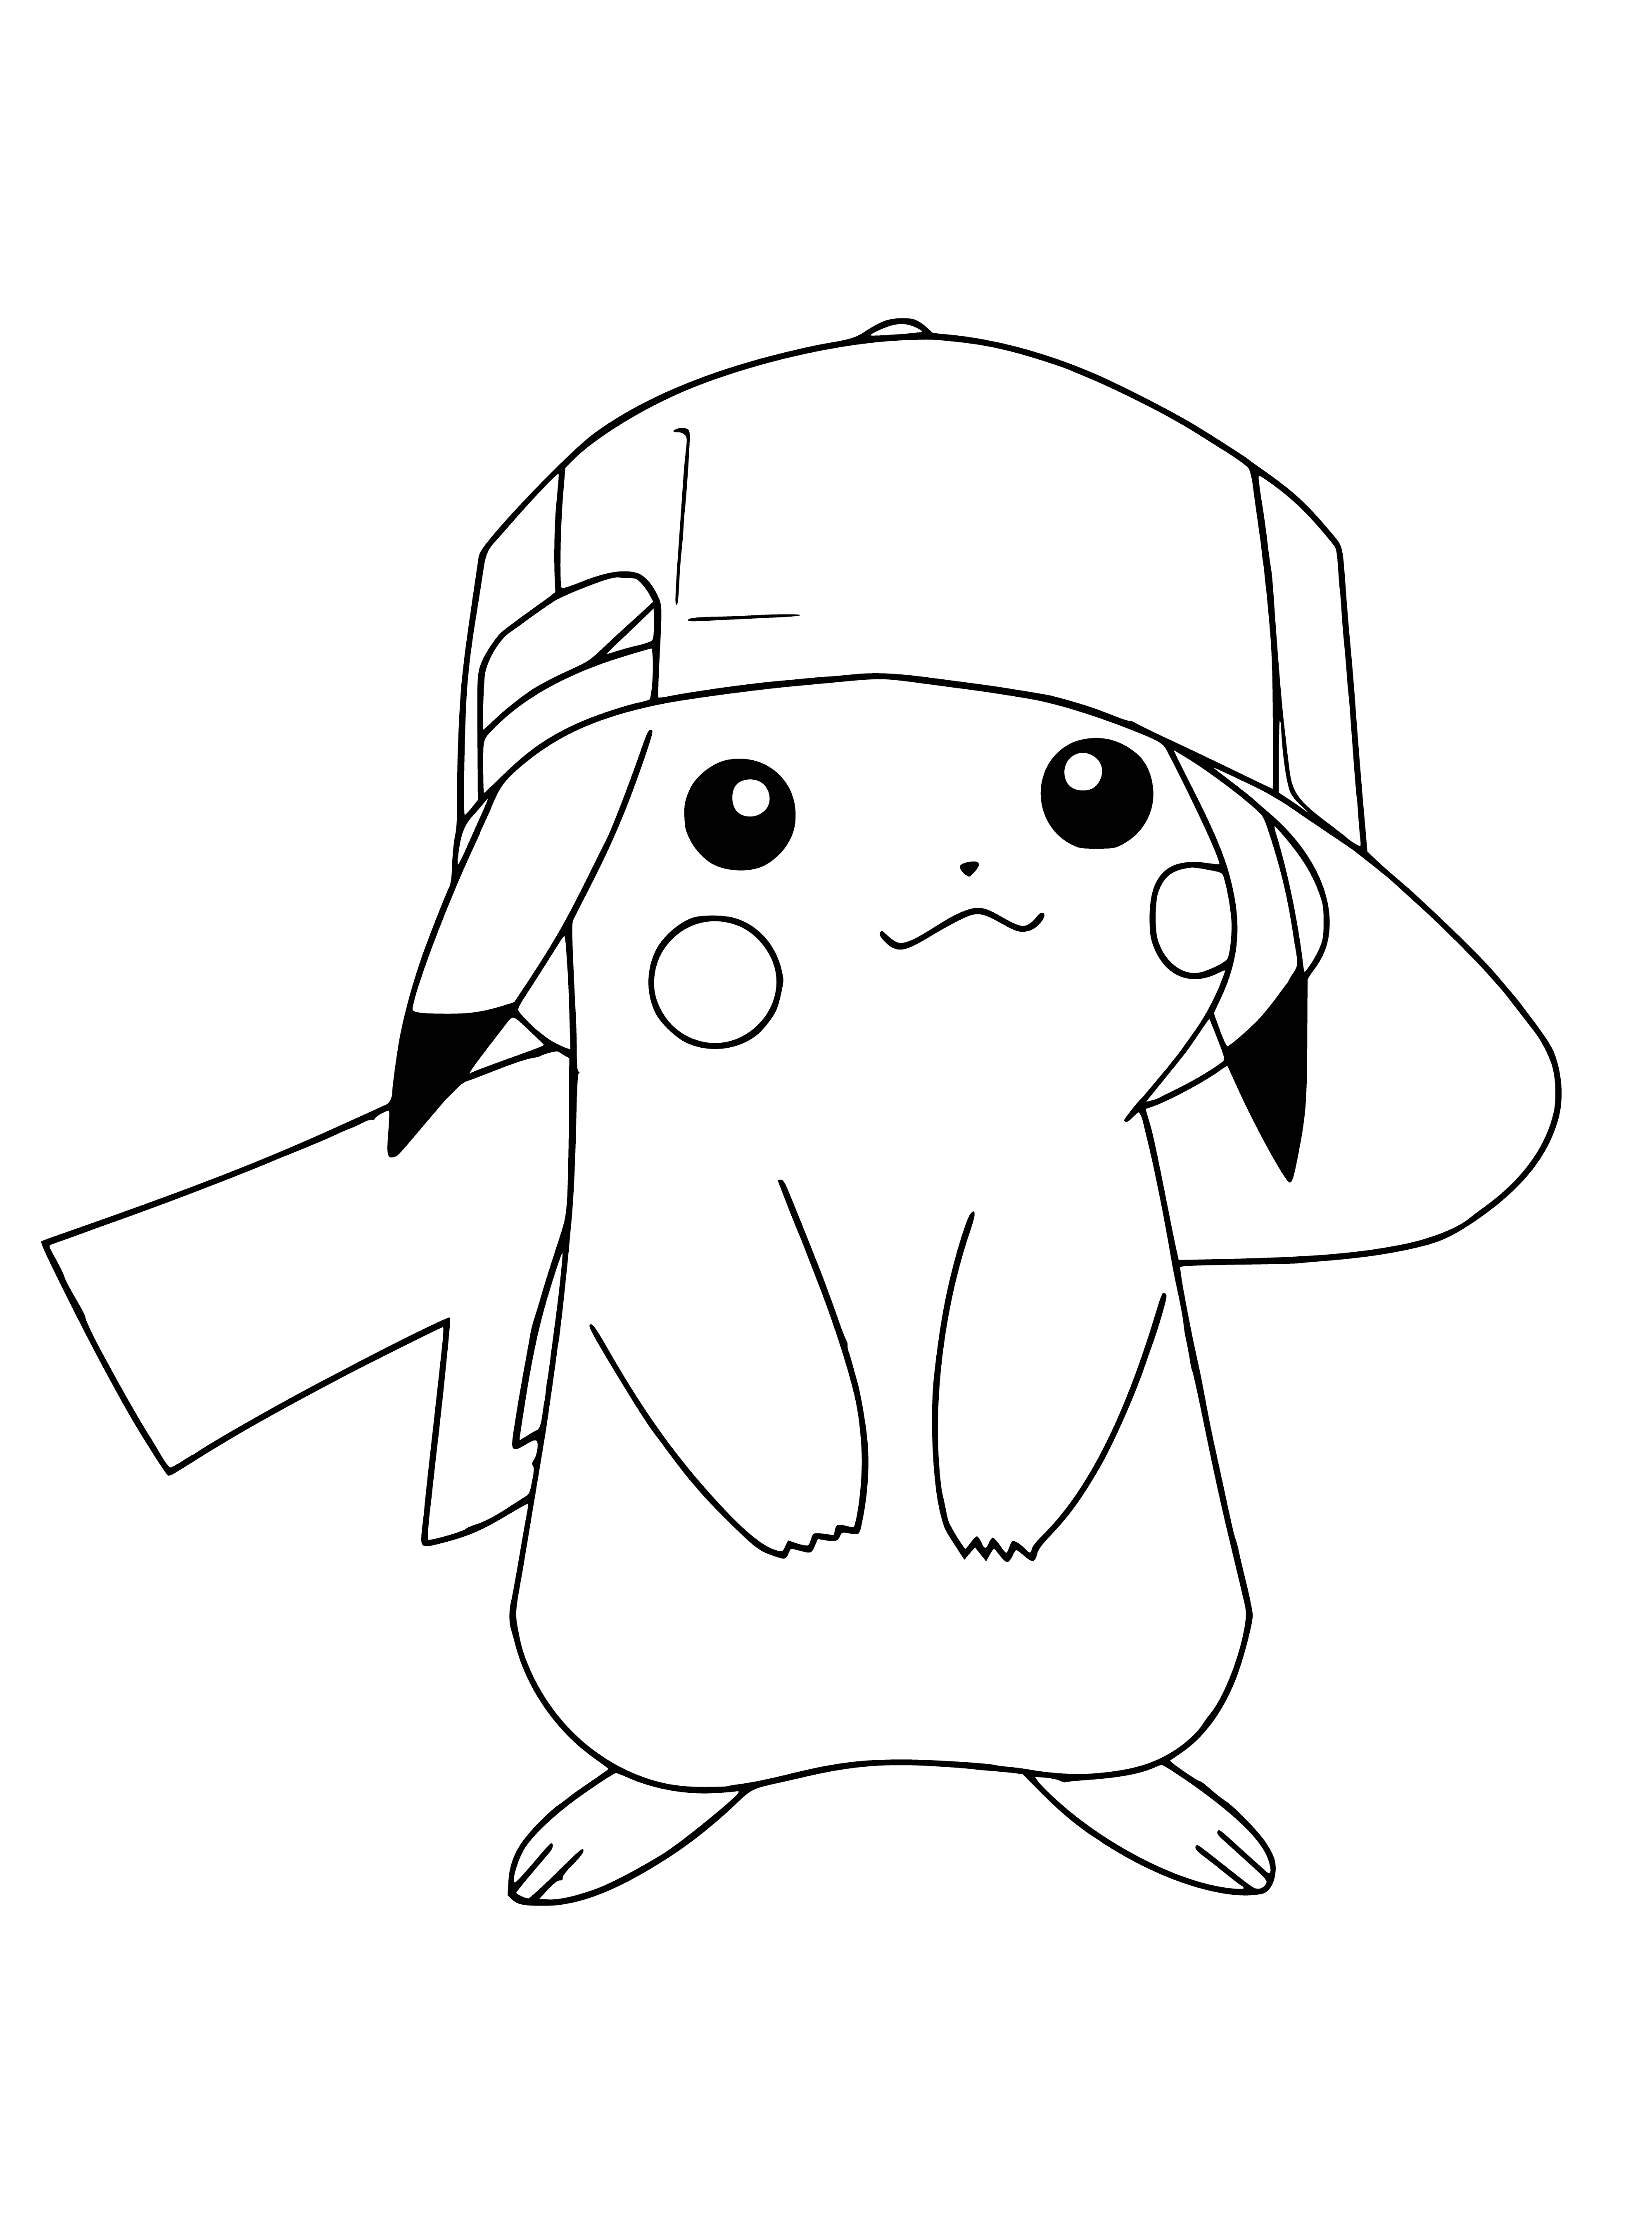 Pikachu in a baseball cap coloring page